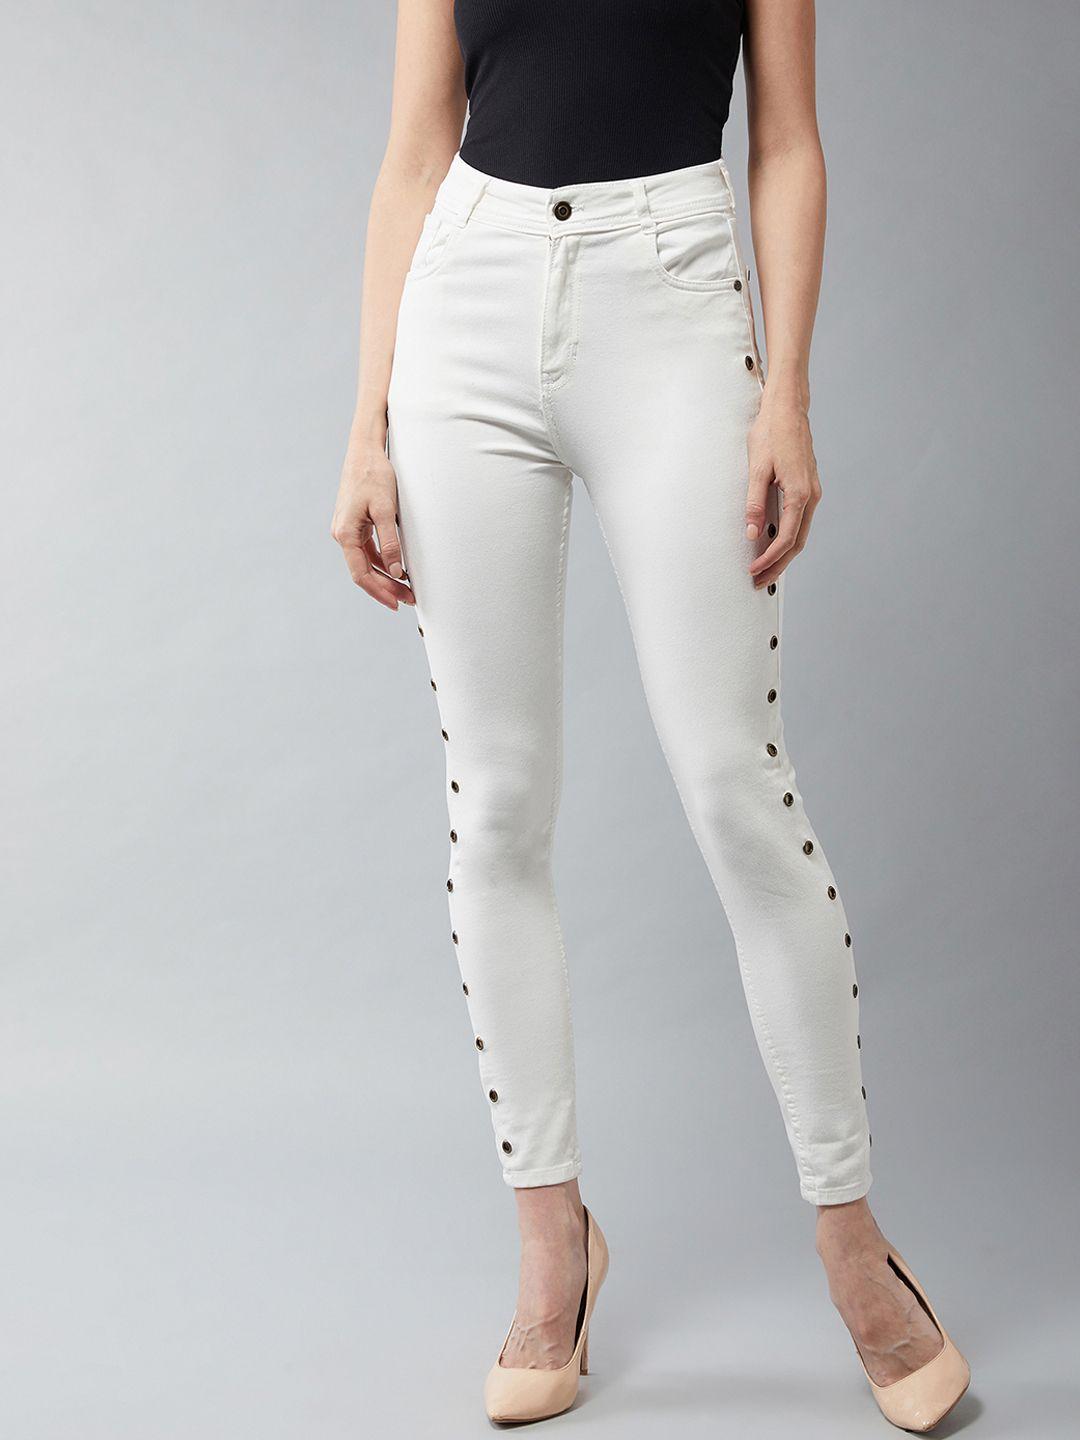 dolce-crudo-women-white-skinny-fit-high-rise-clean-look-stretchable-jeans